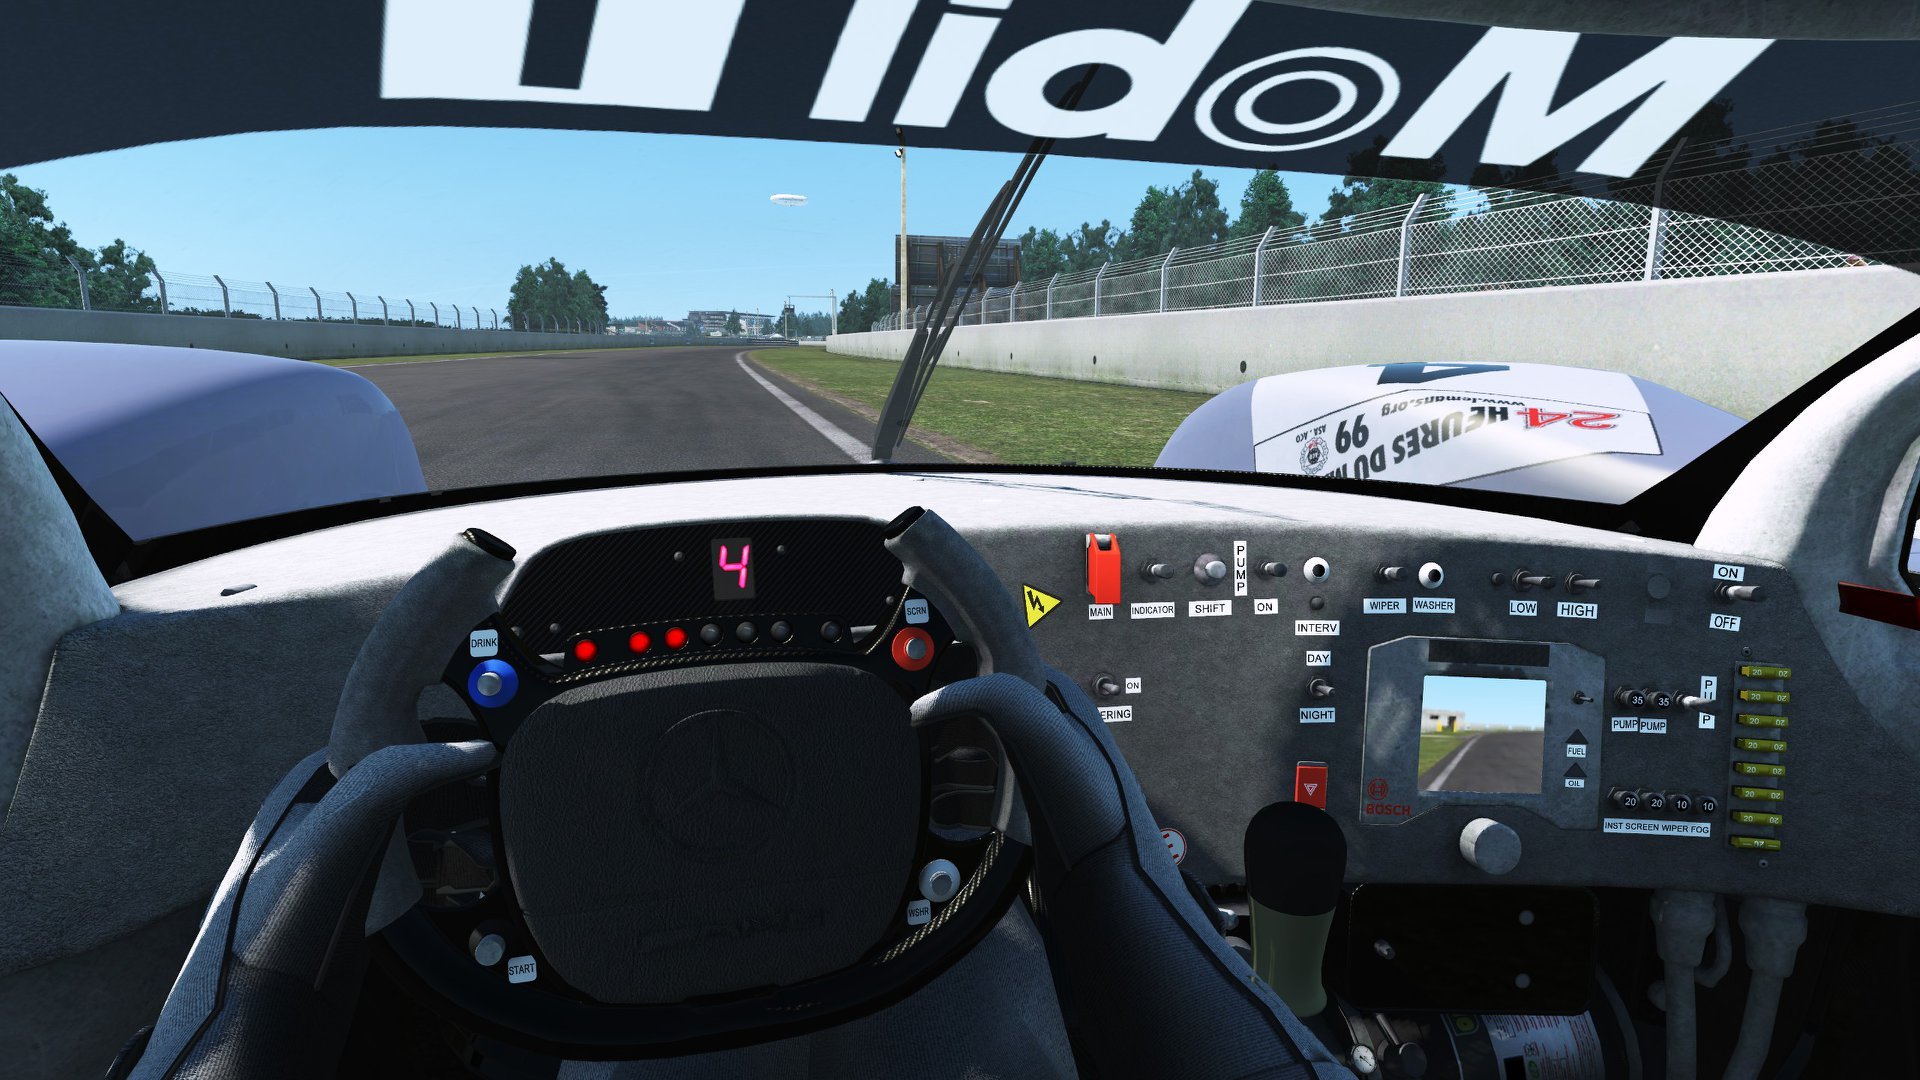 More information about "rFactor 2: Le Mans 1999 Mod by Apex Modding in video e screens"